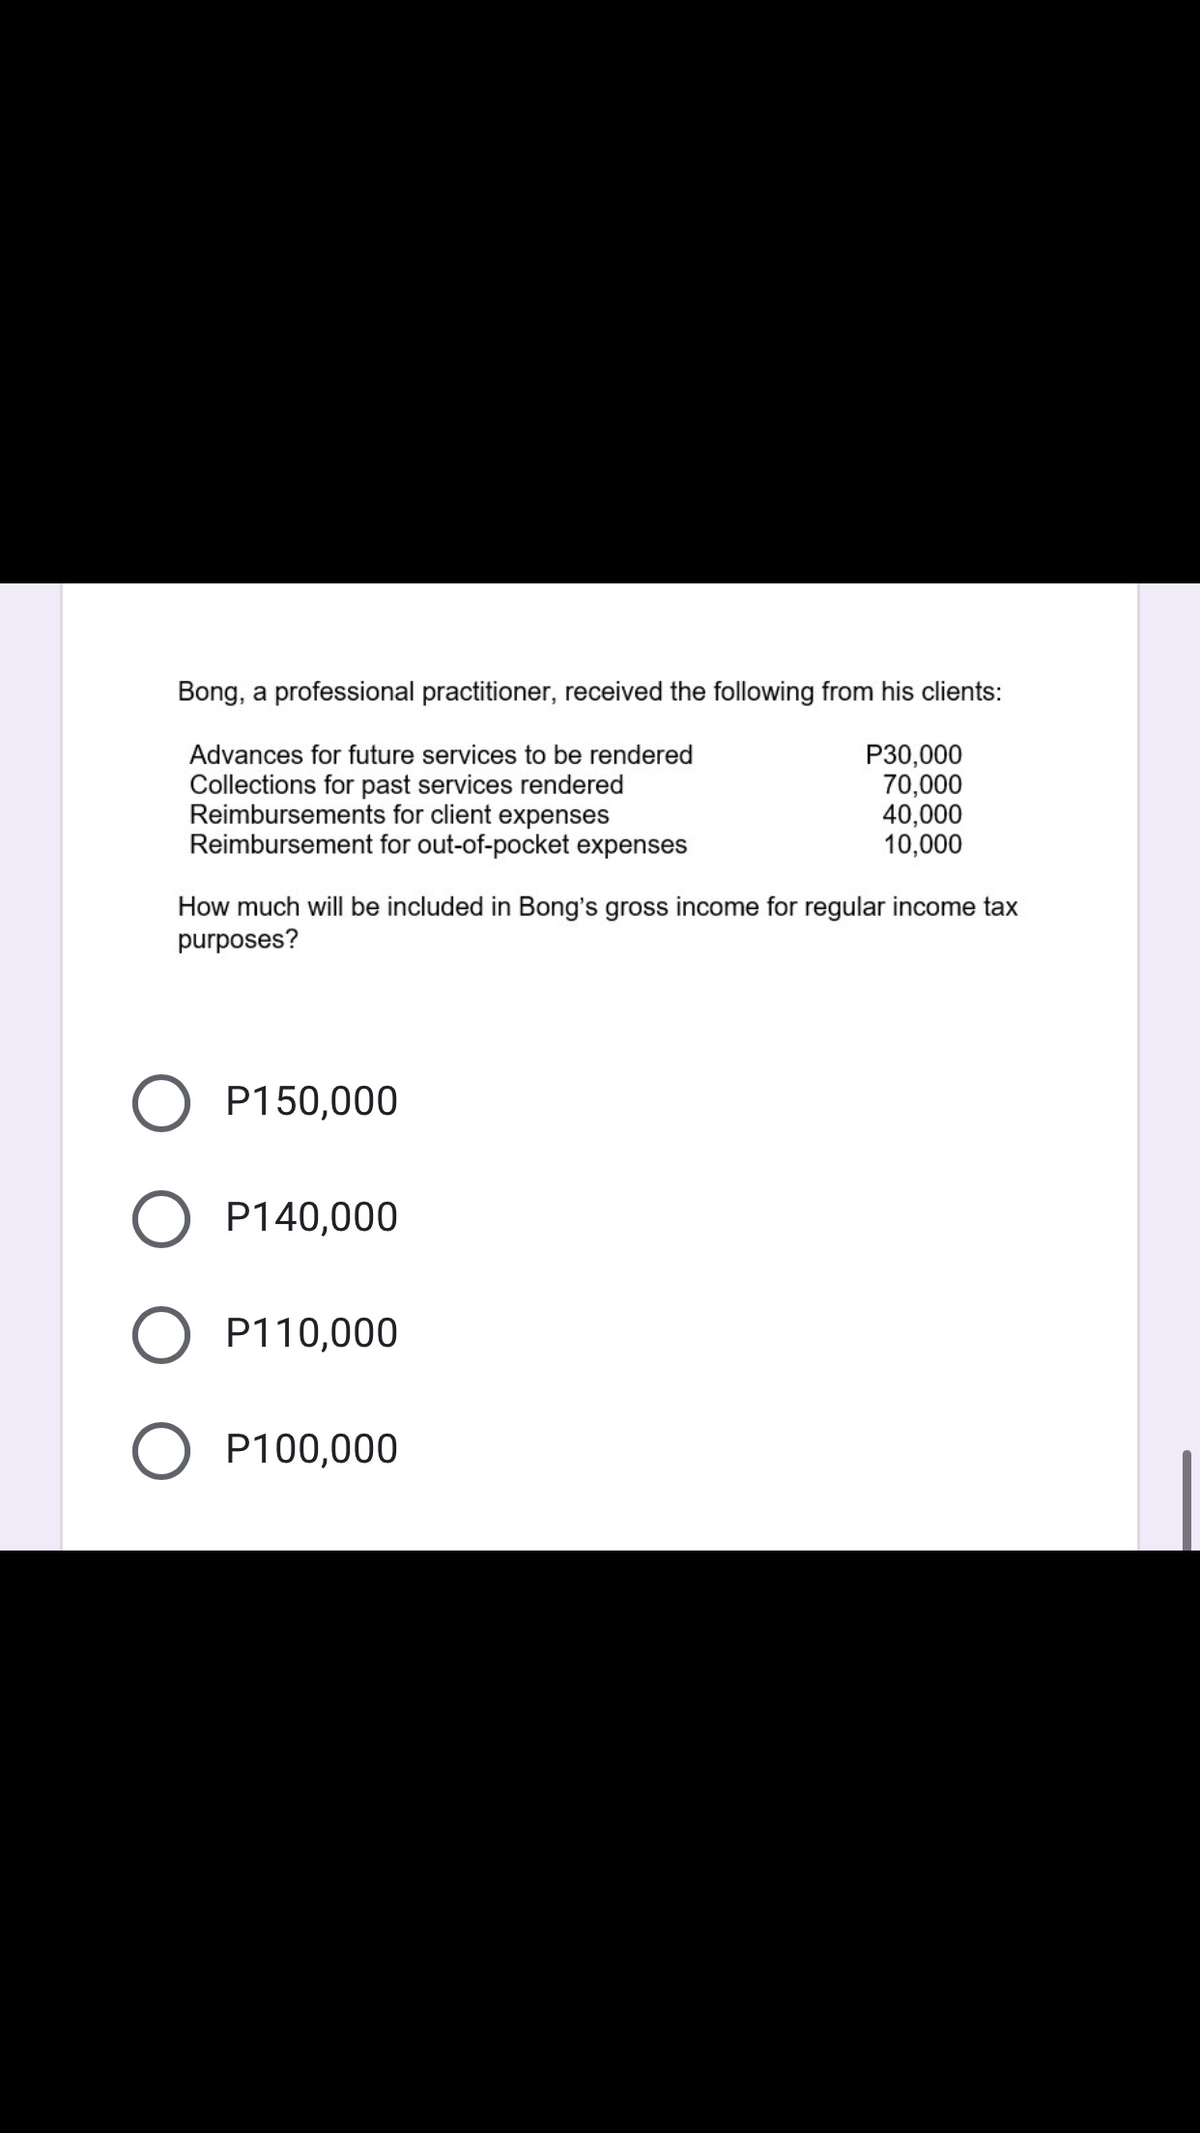 Bong, a professional practitioner, received the following from his clients:
Advances for future services to be rendered
Collections for past services rendered
Reimbursements for client expenses
Reimbursement for out-of-pocket expenses
P30,000
70,000
40,000
10,000
How much will be included in Bong's gross income for regular income tax
purposes?
P150,000
P140,000
P110,000
P100,000
